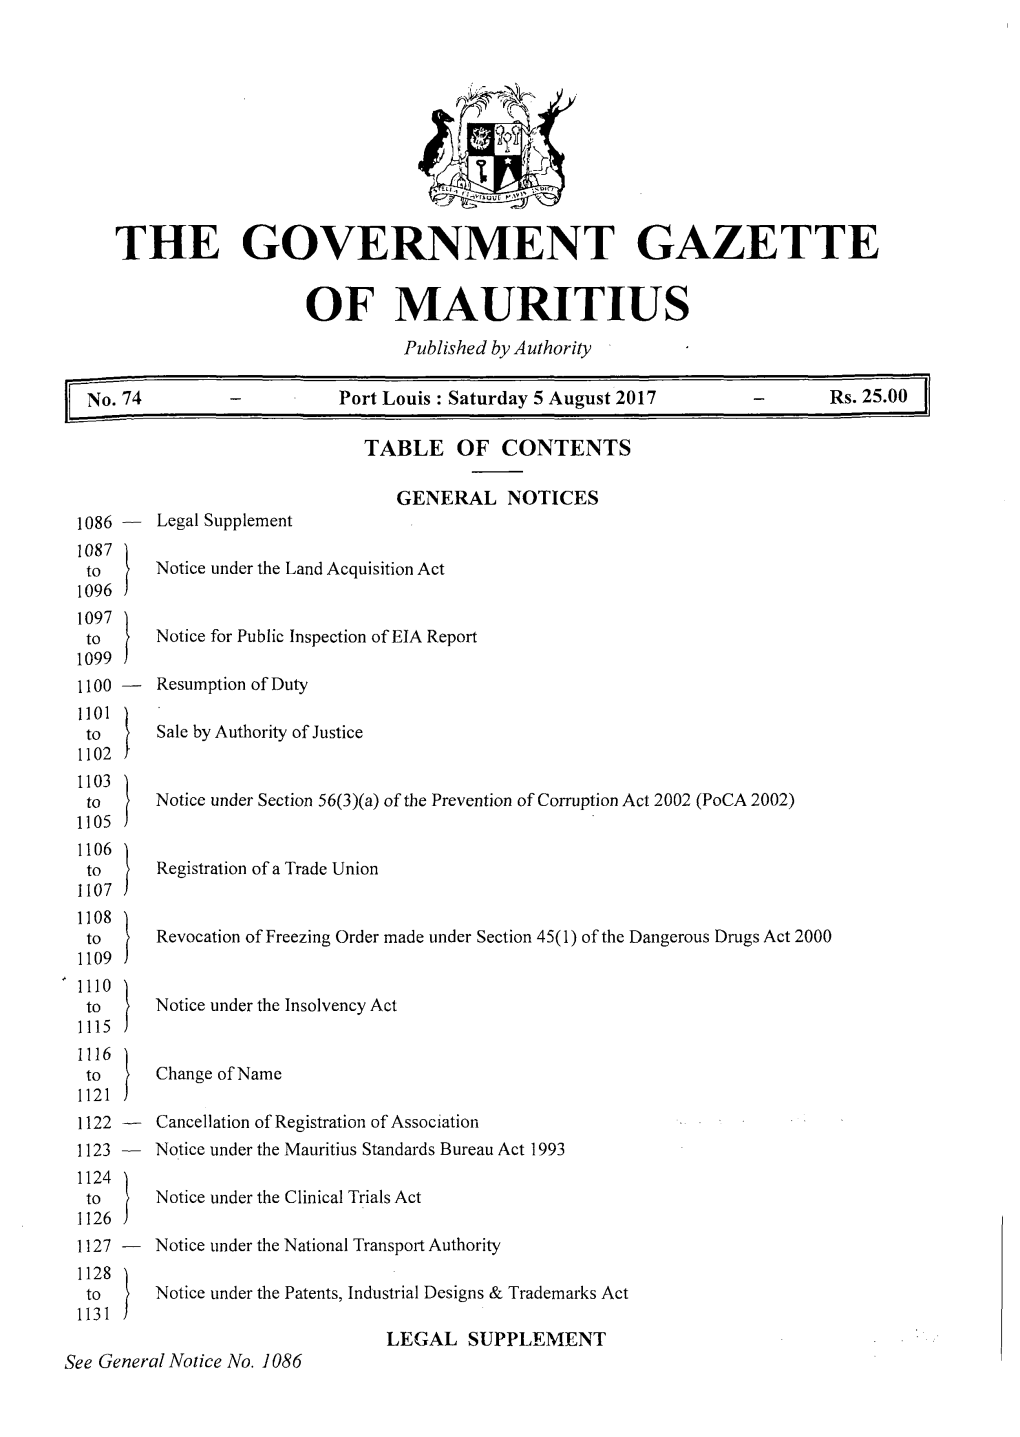 THE GOVERNMENT GAZETTE of MAURITIUS Published by Authority